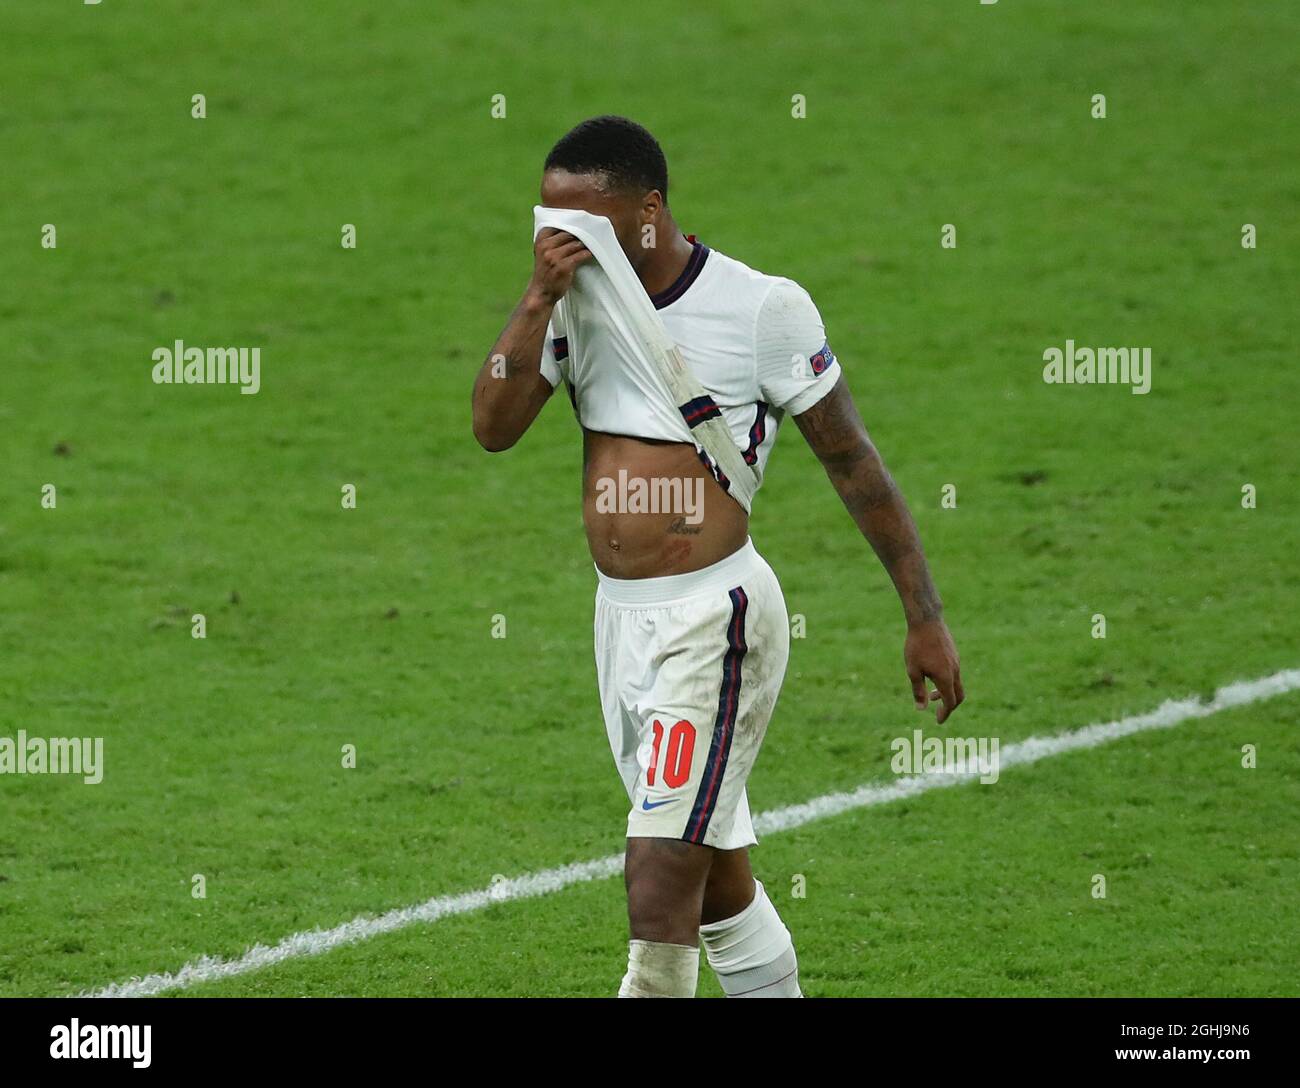 London, England, 11th July 2021.  Raheem Sterling of England during the UEFA Euro 2020 final at Wembley Stadium, London. Picture credit should read: David Klein / Sportimage via PA Images Stock Photo